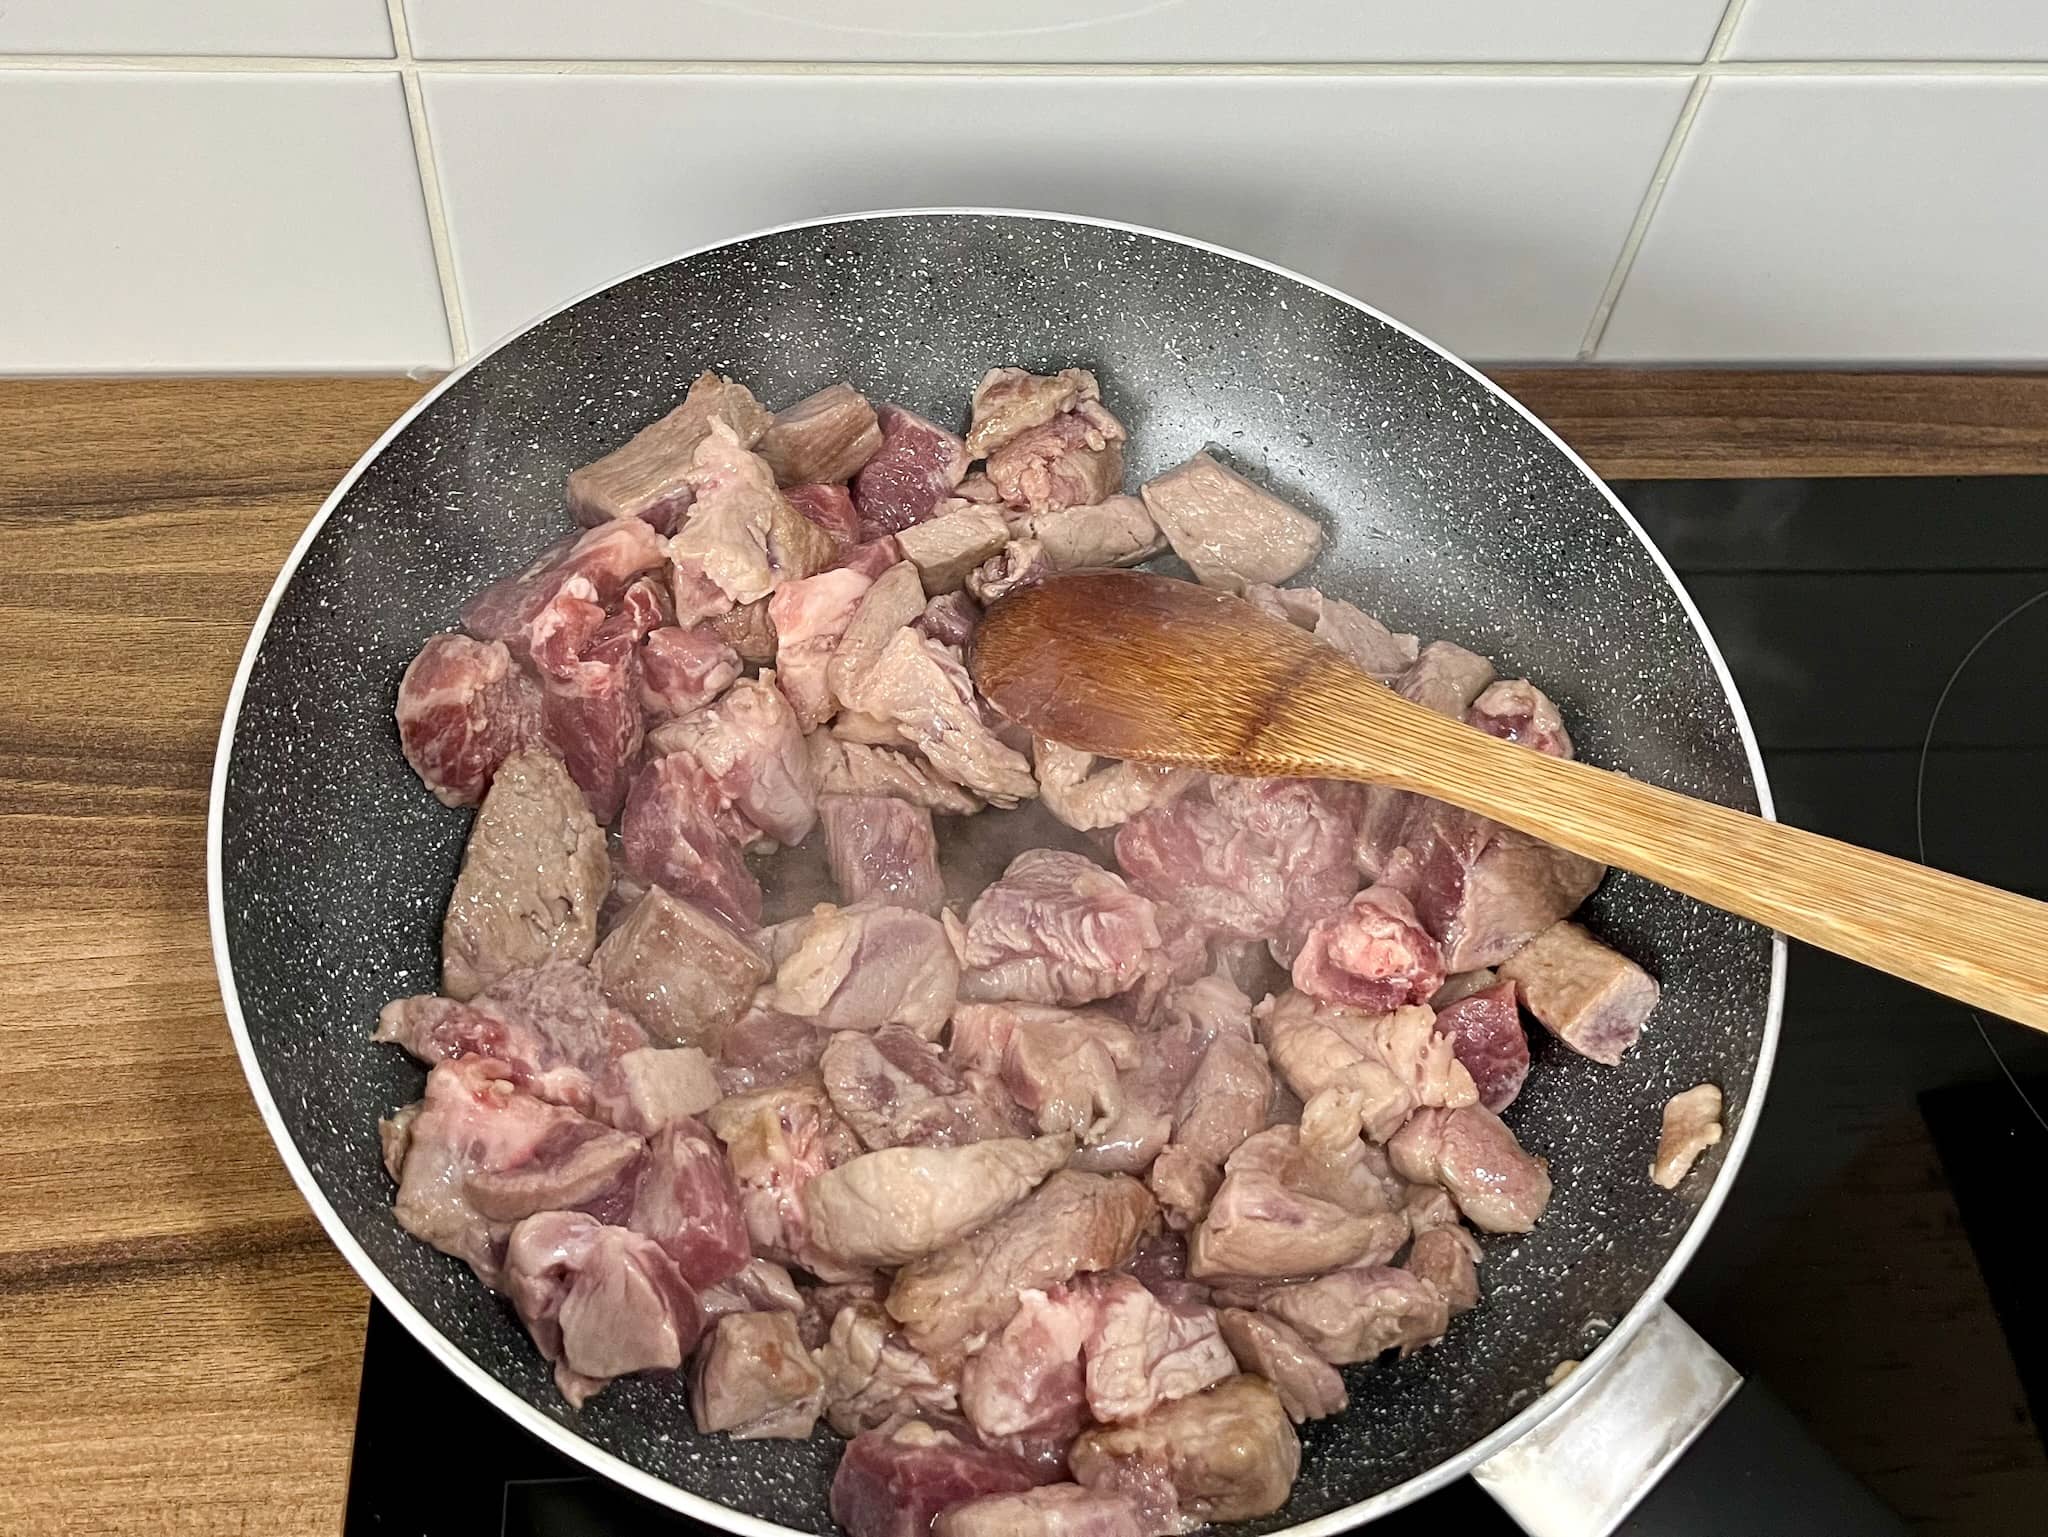 Chunks of pork frying in a pan